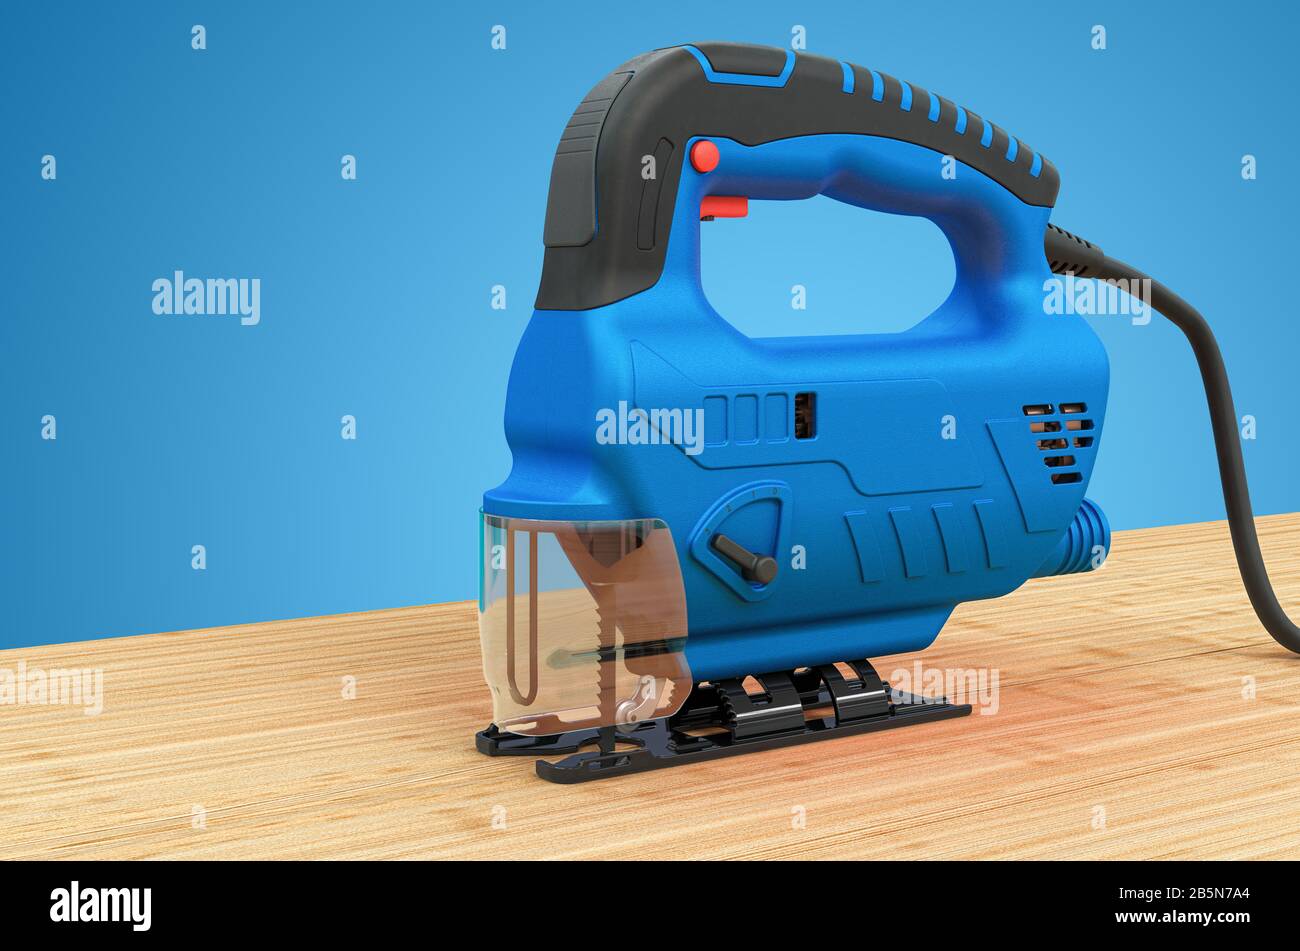 Power jigsaw sawing a wood board, 3D rendering Stock Photo